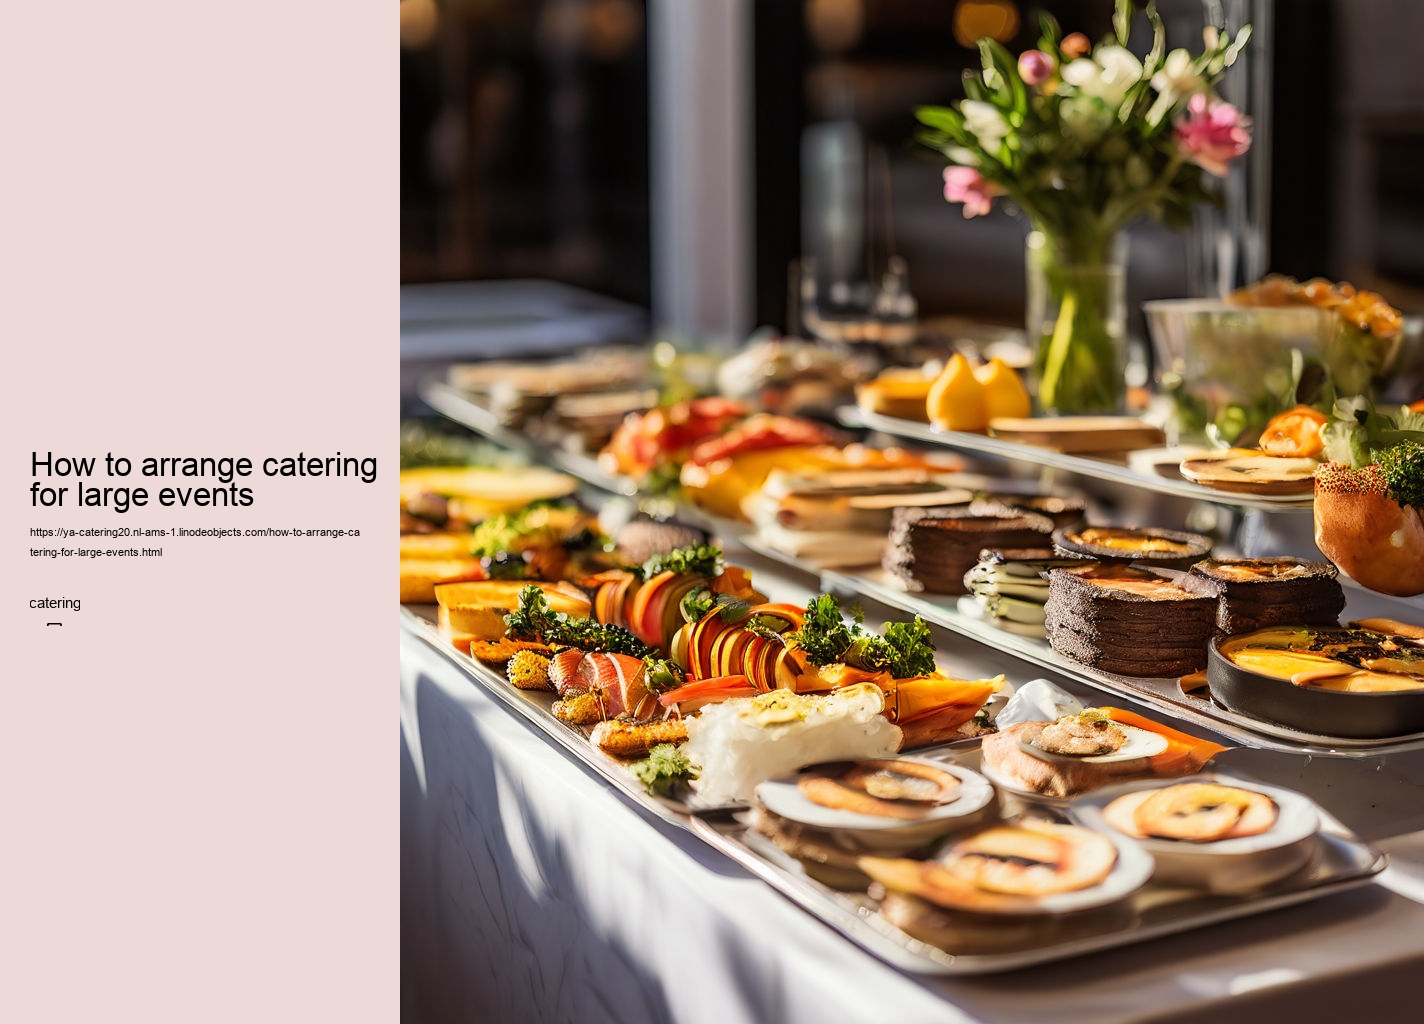 How to arrange catering for large events